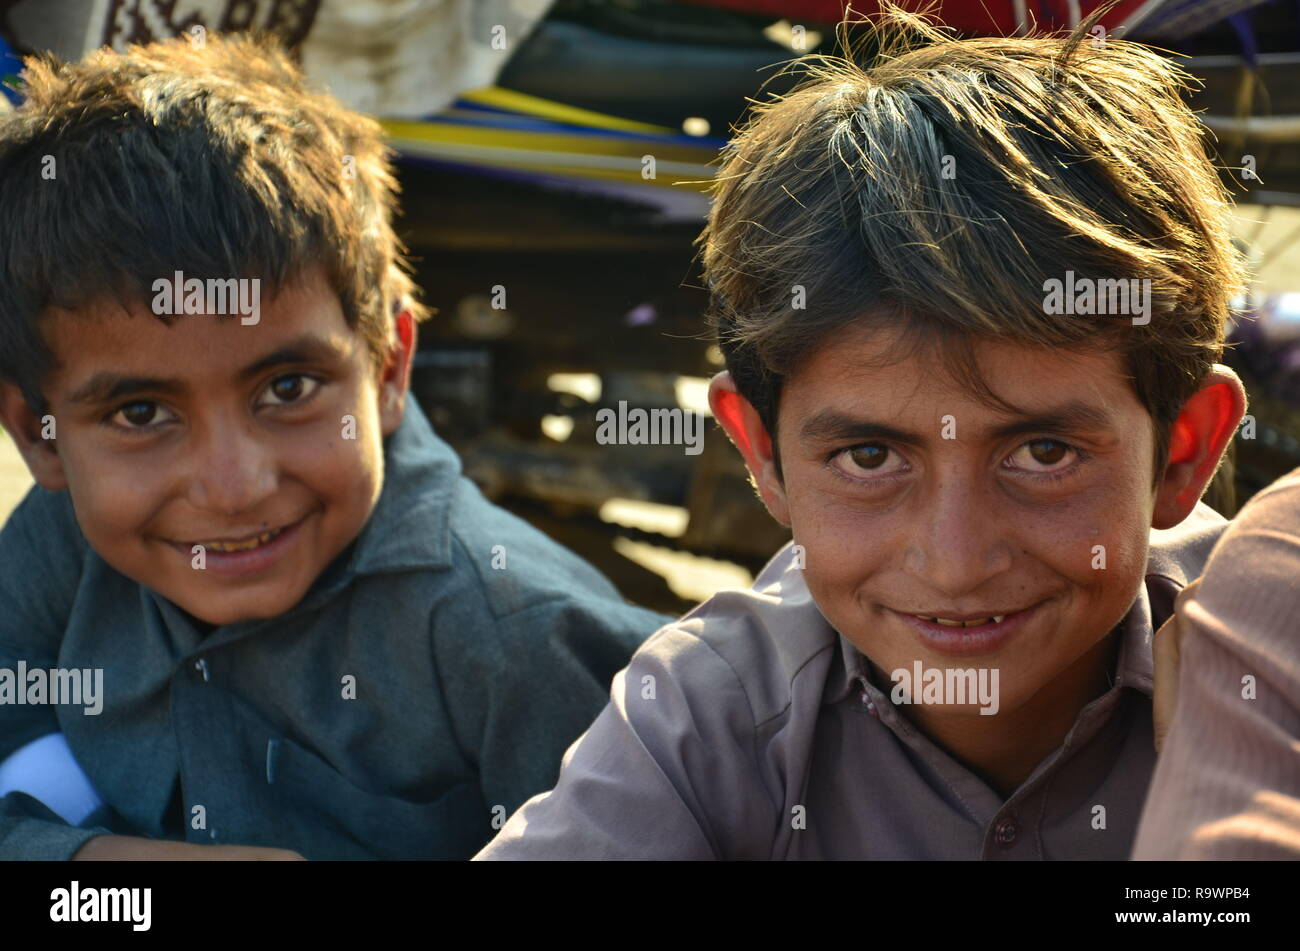 Two boys in rural Sindh, Pakistan Stock Photo